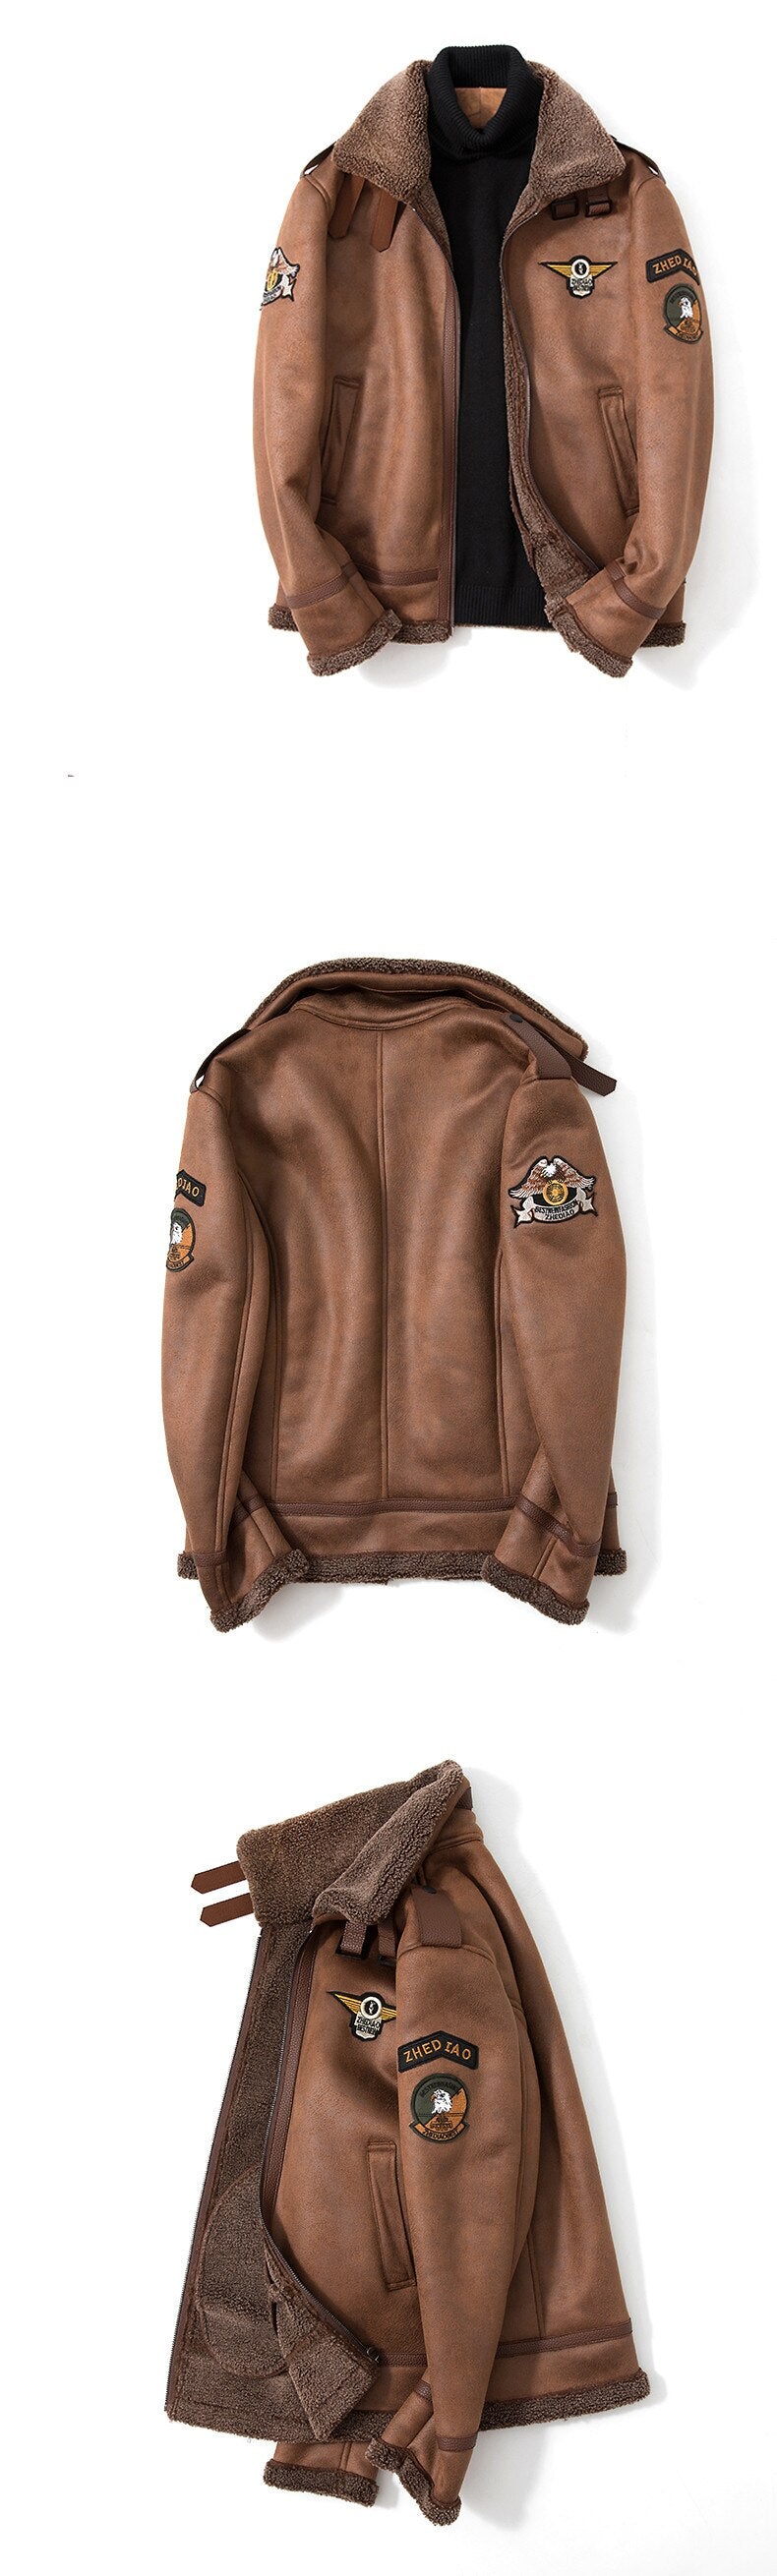 Special Edition Suede & Super Cool Fighter Pilot Jackets